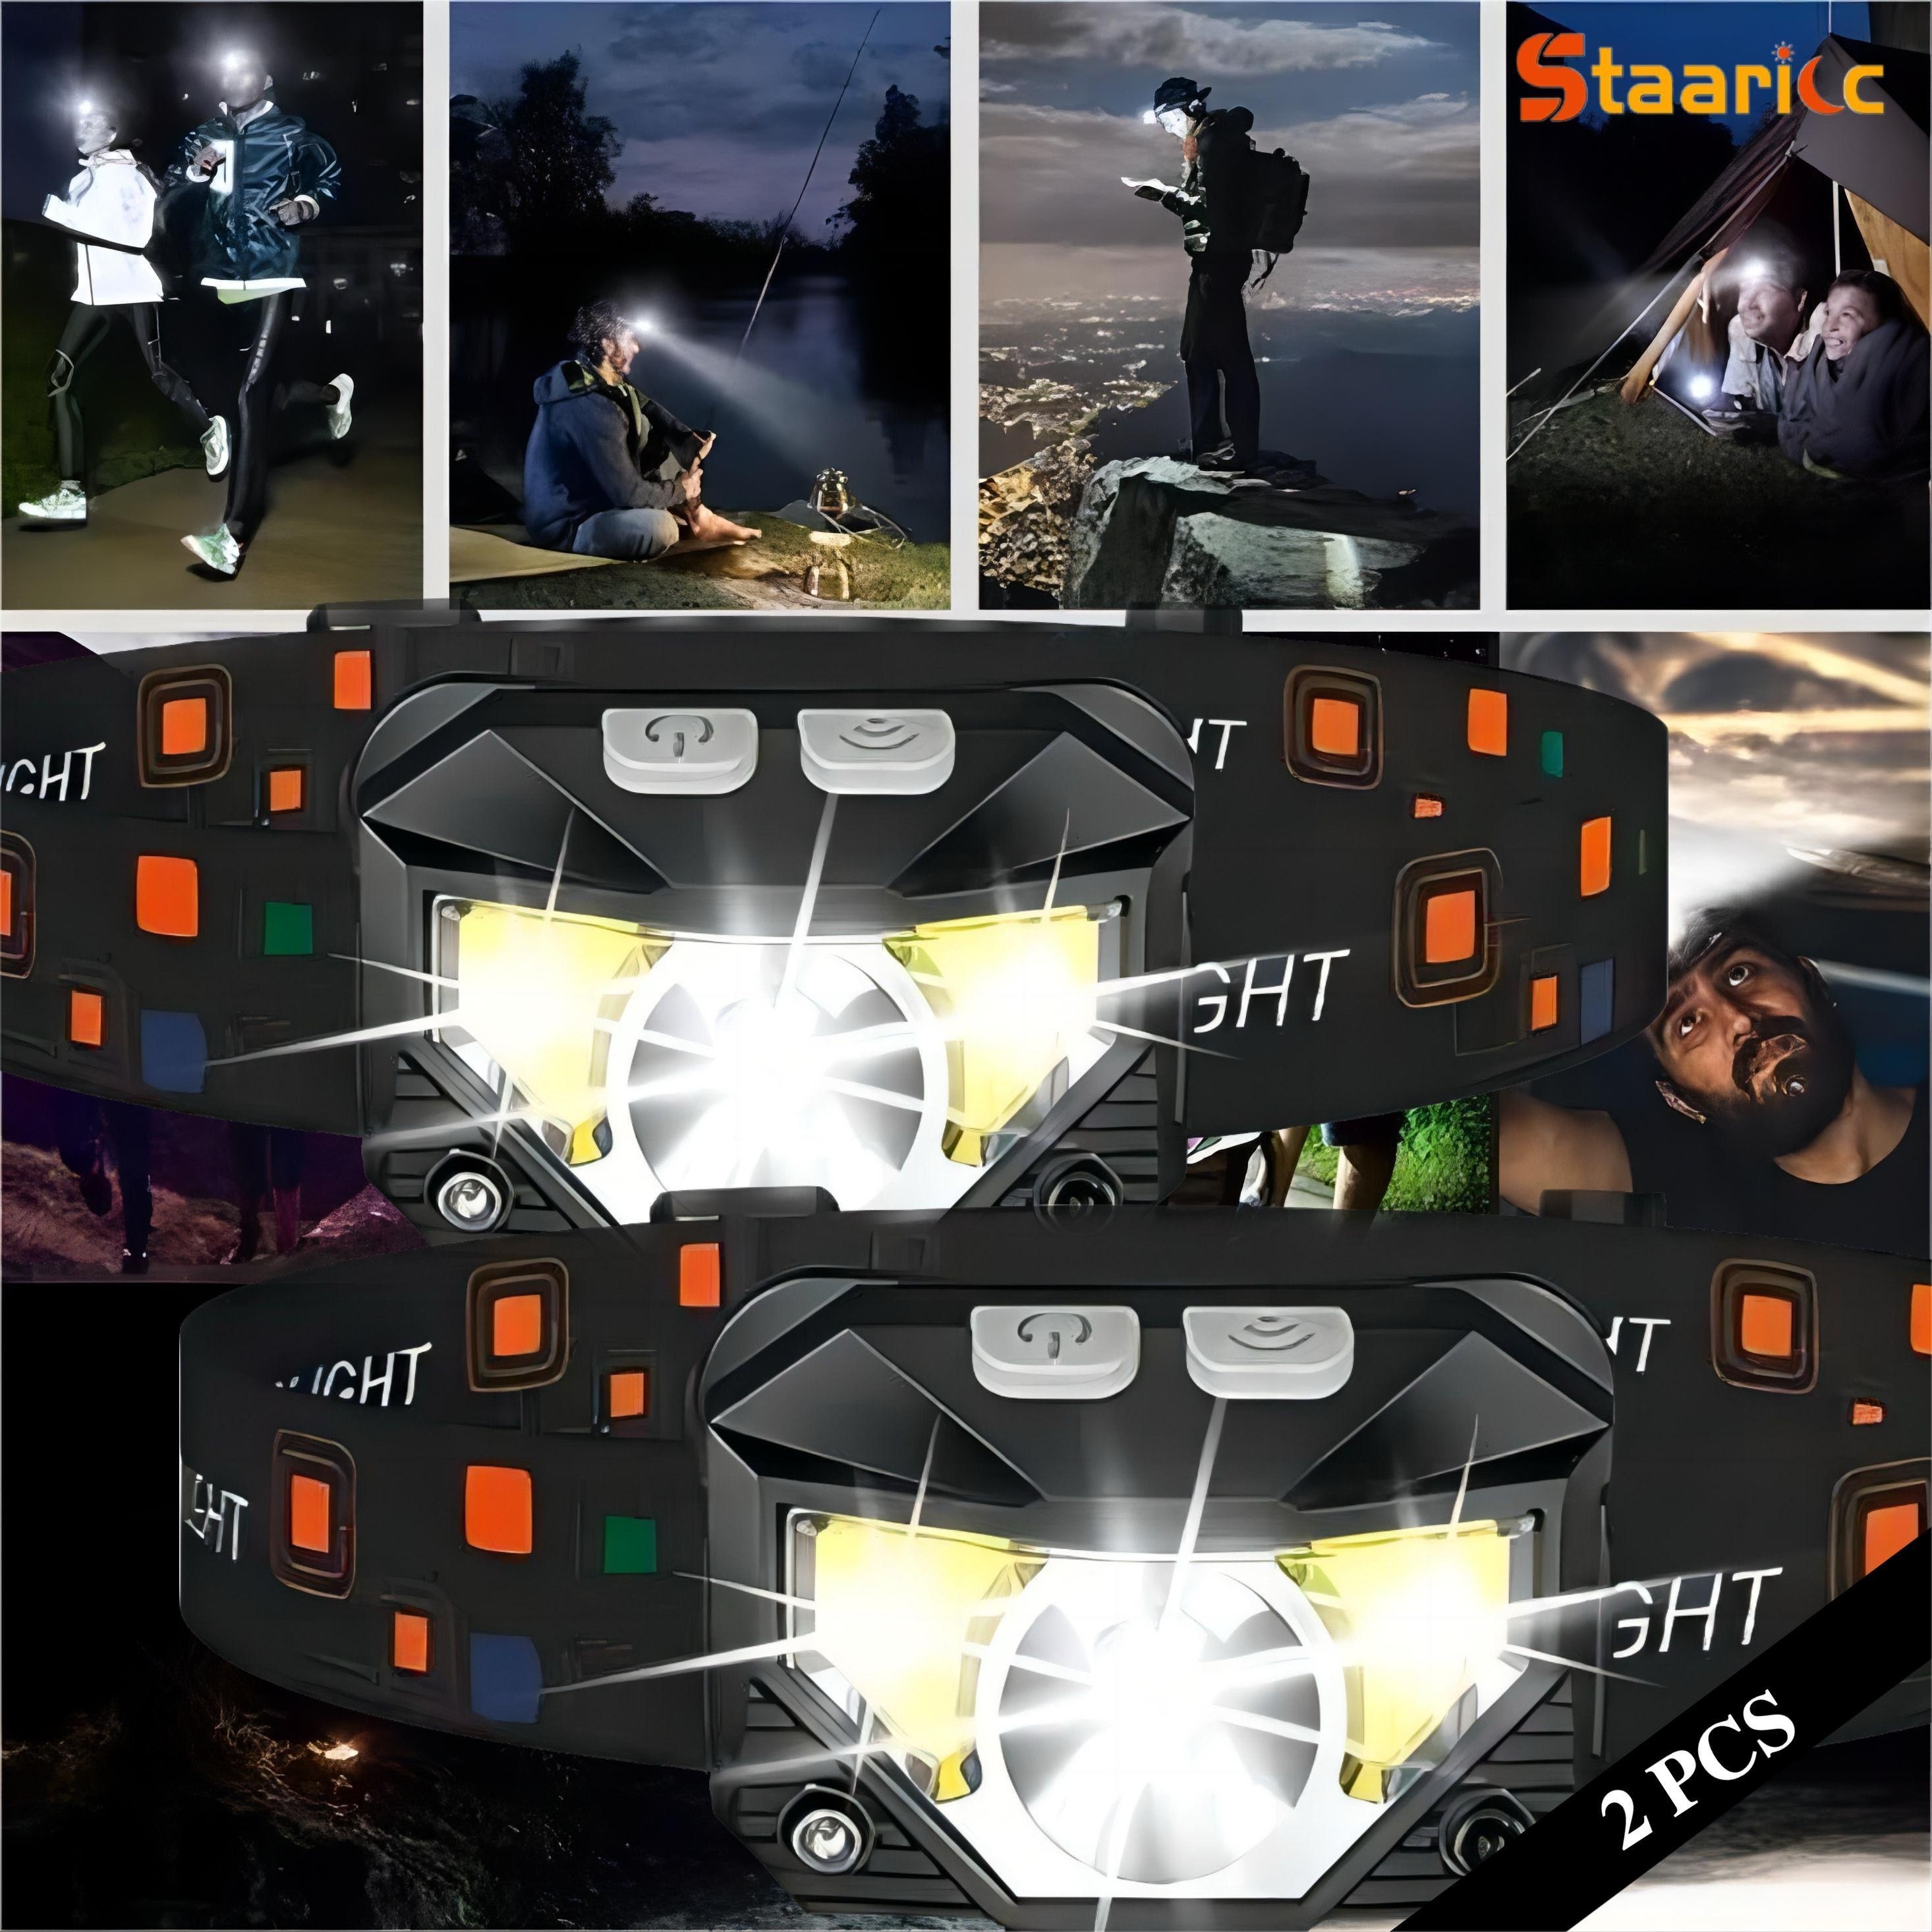 

2pcs Staaricc 1200 Lumens Ultra Bright Led Rechargeable Headlights, Xpg+cob Headlamp Flashlights With Red And White Light Motion Sensor, 8 Modes For Outdoor Camping, Running, Fishing, Emergency